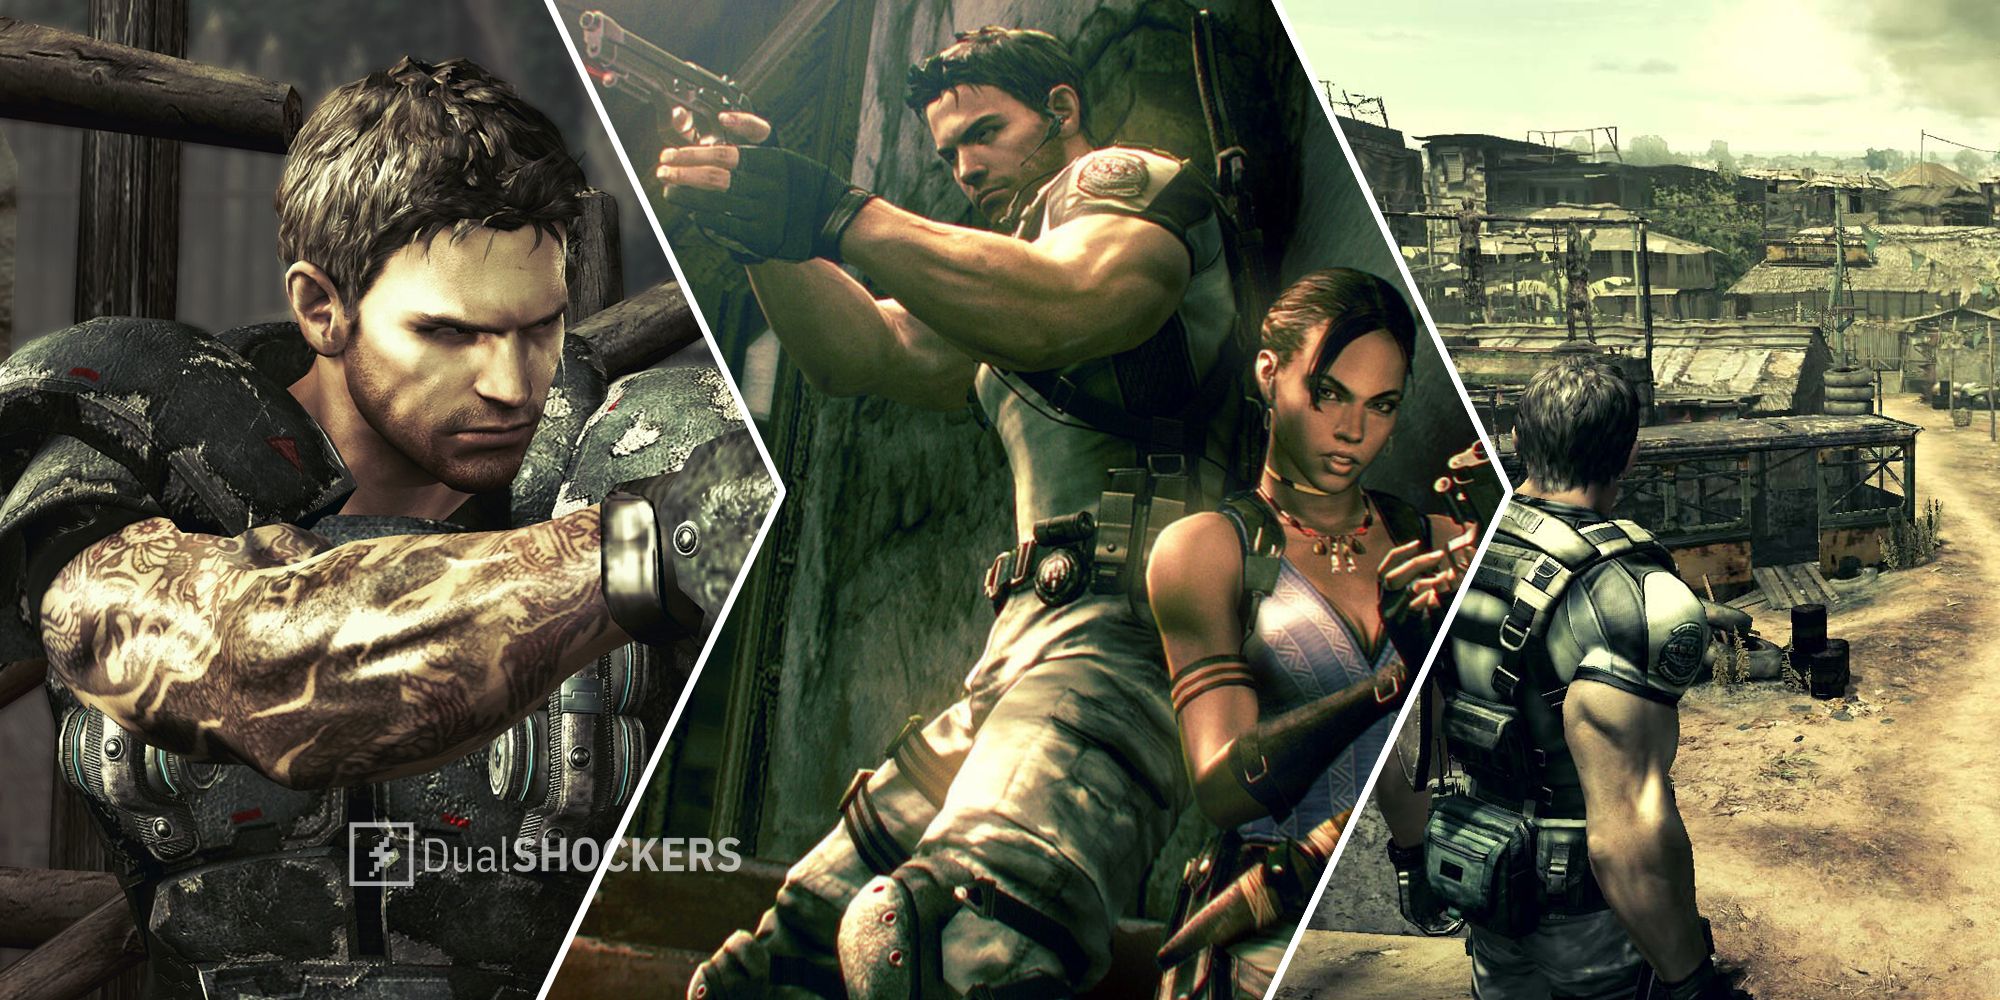 Resident Evil 5 February 28th Update completely removes GFWL, adds